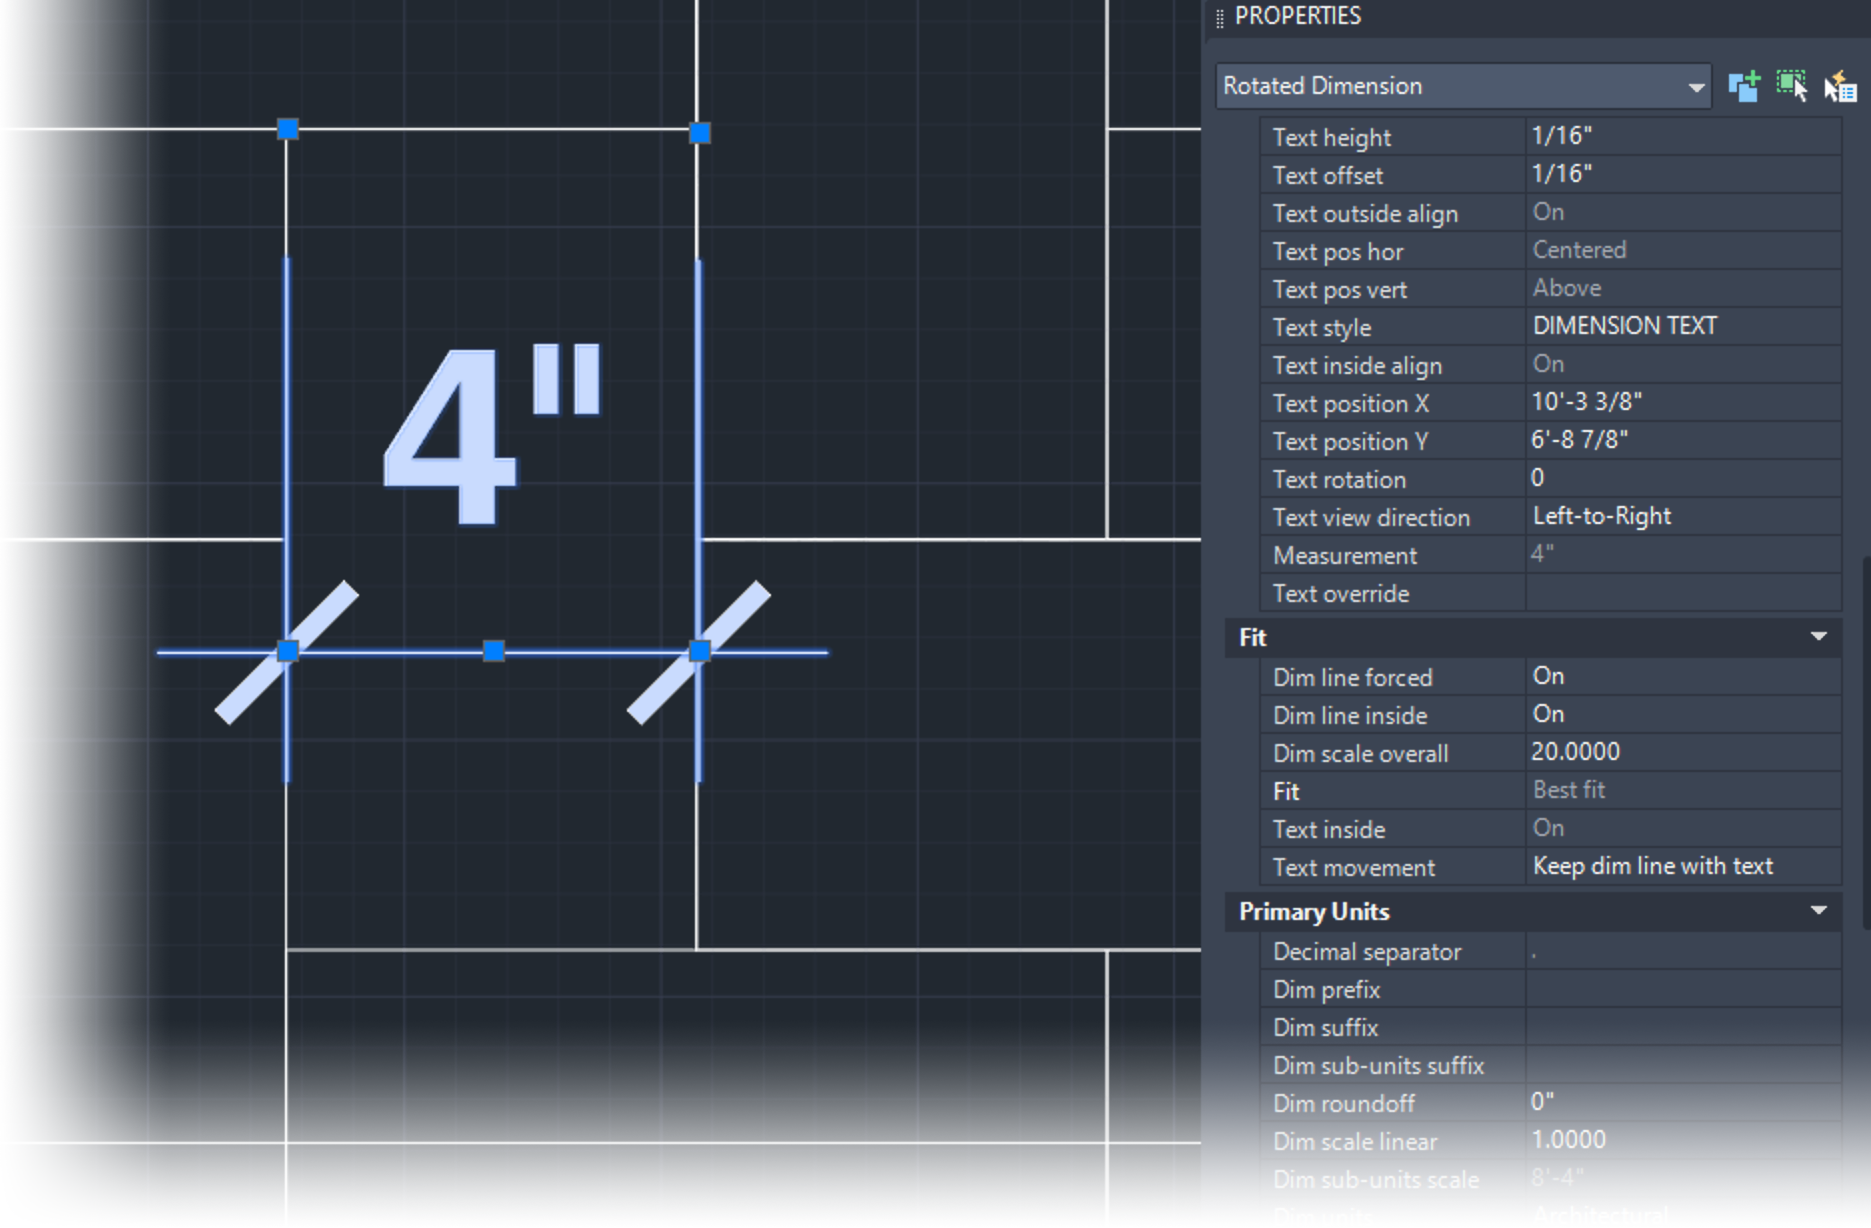 hatch scale in one direction - AutoCAD 2D Drafting, Object Properties &  Interface - AutoCAD Forums